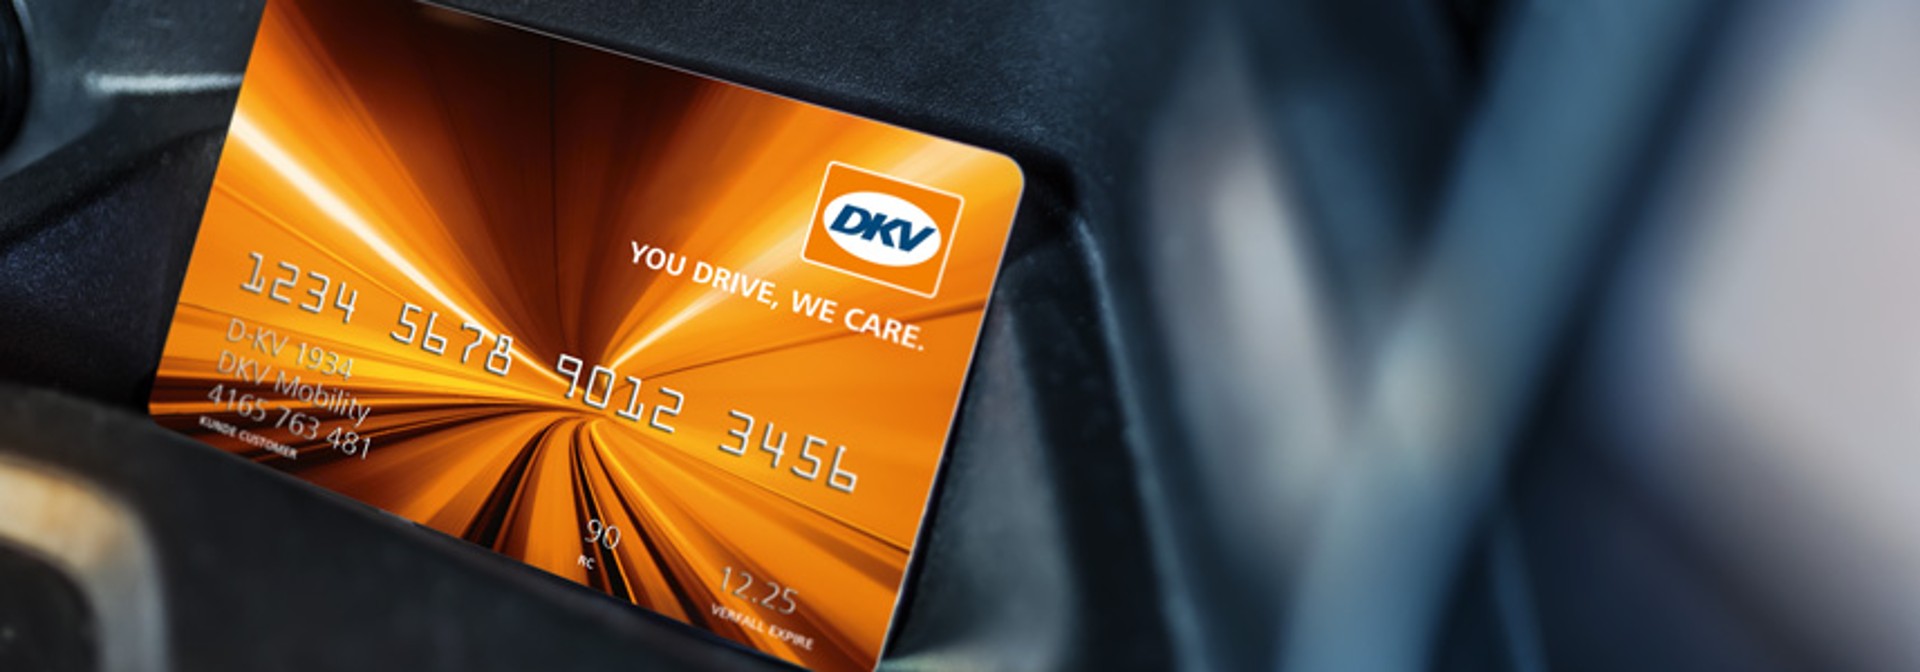 Easy Payment with DKV CARD